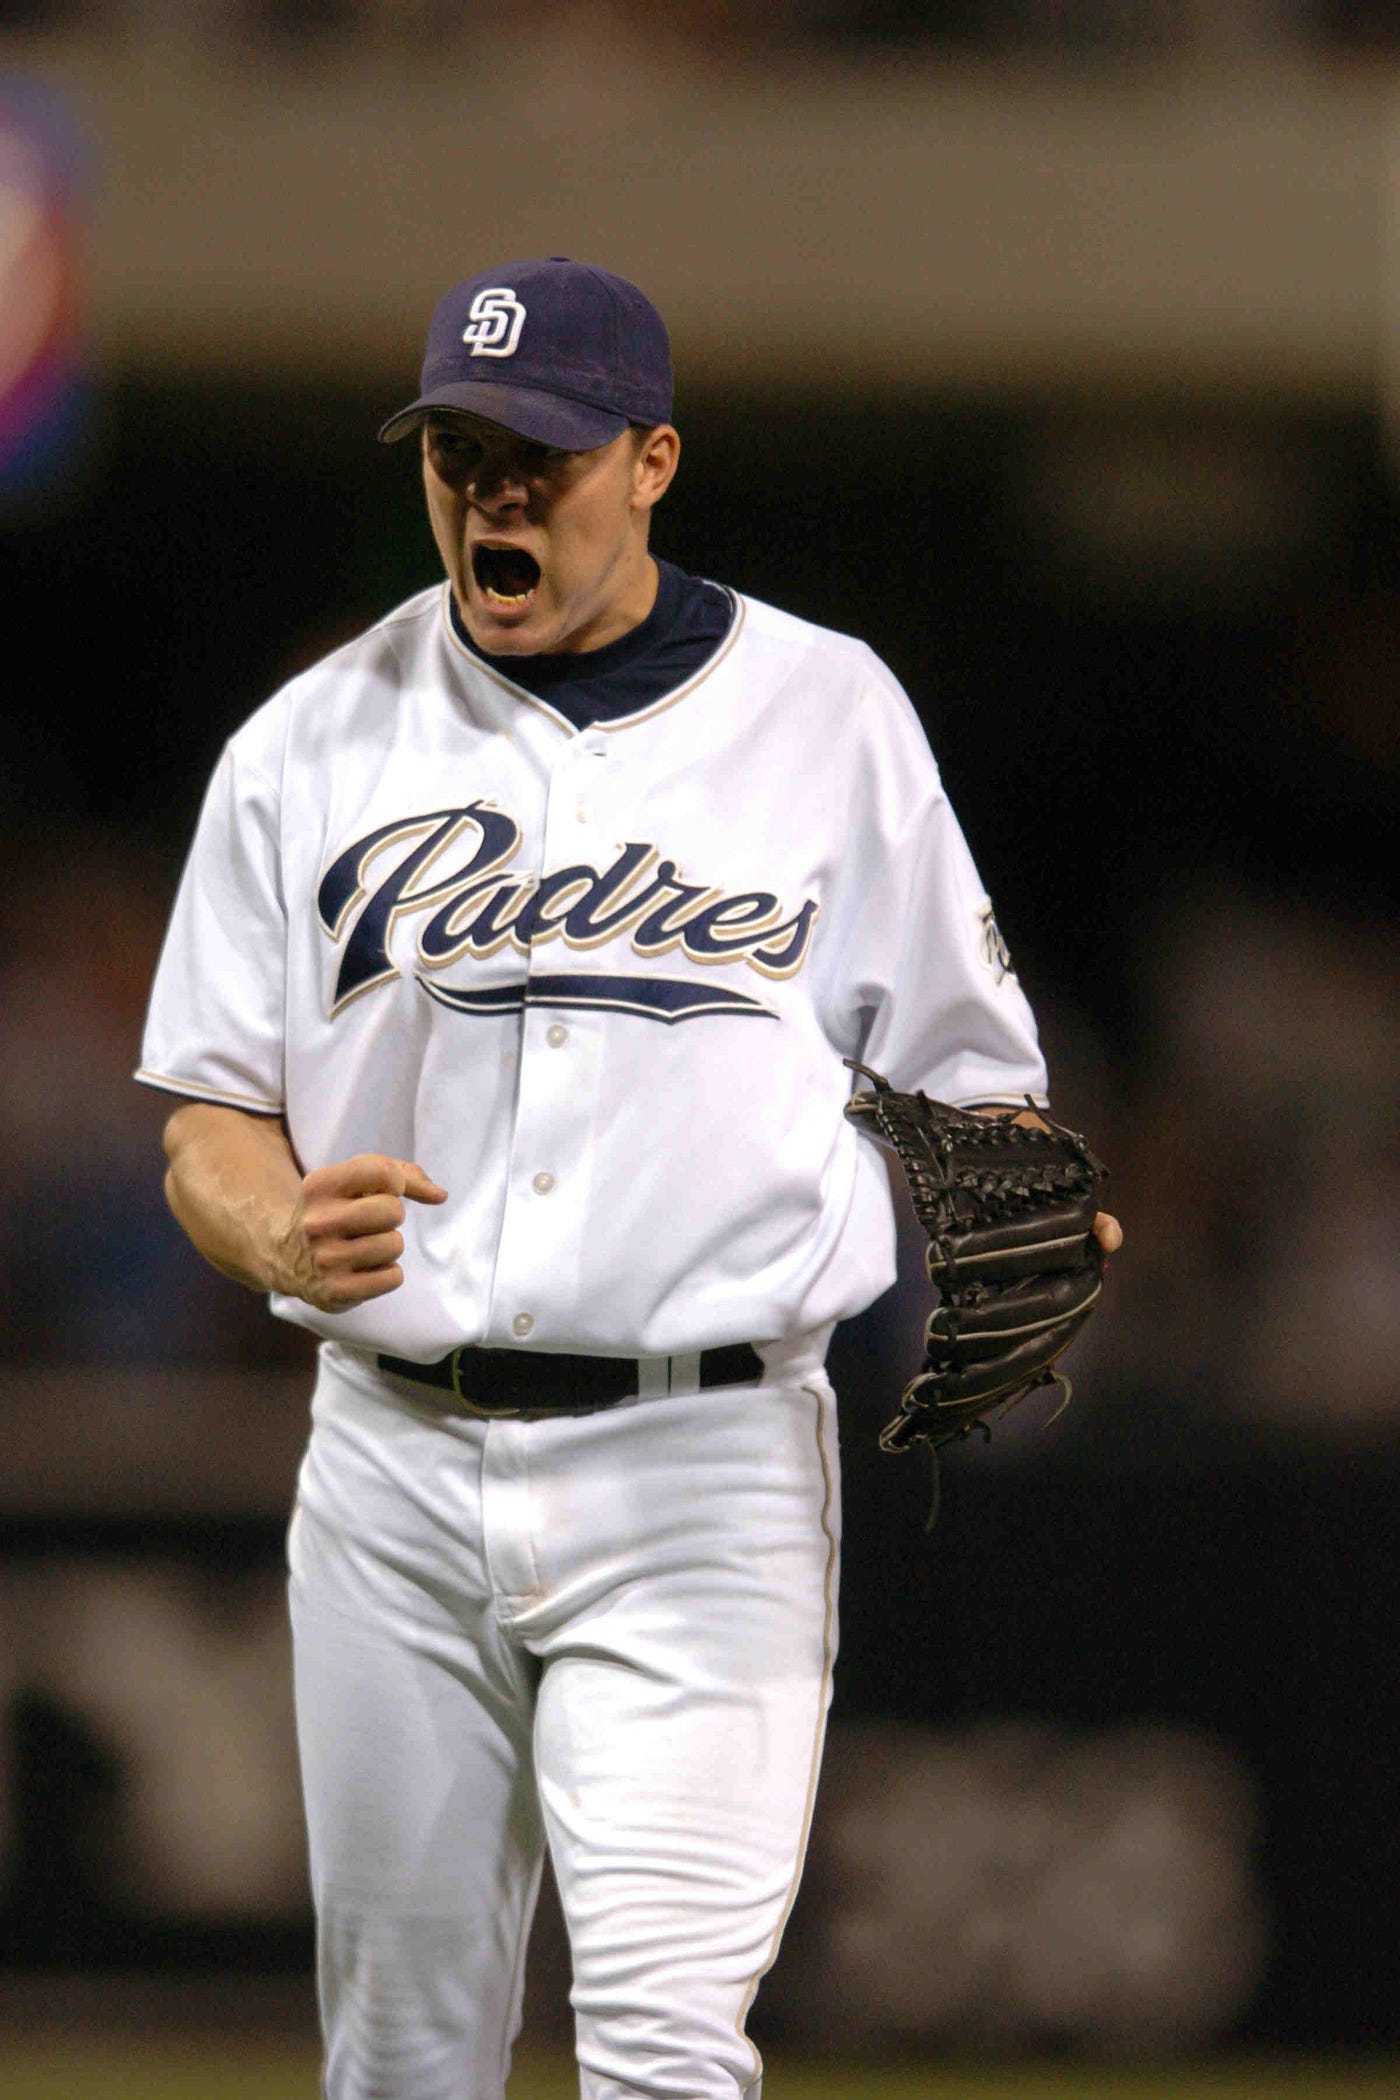 Peavy Became Padres' 4th Cy Young Award Winner in 2007, by FriarWire